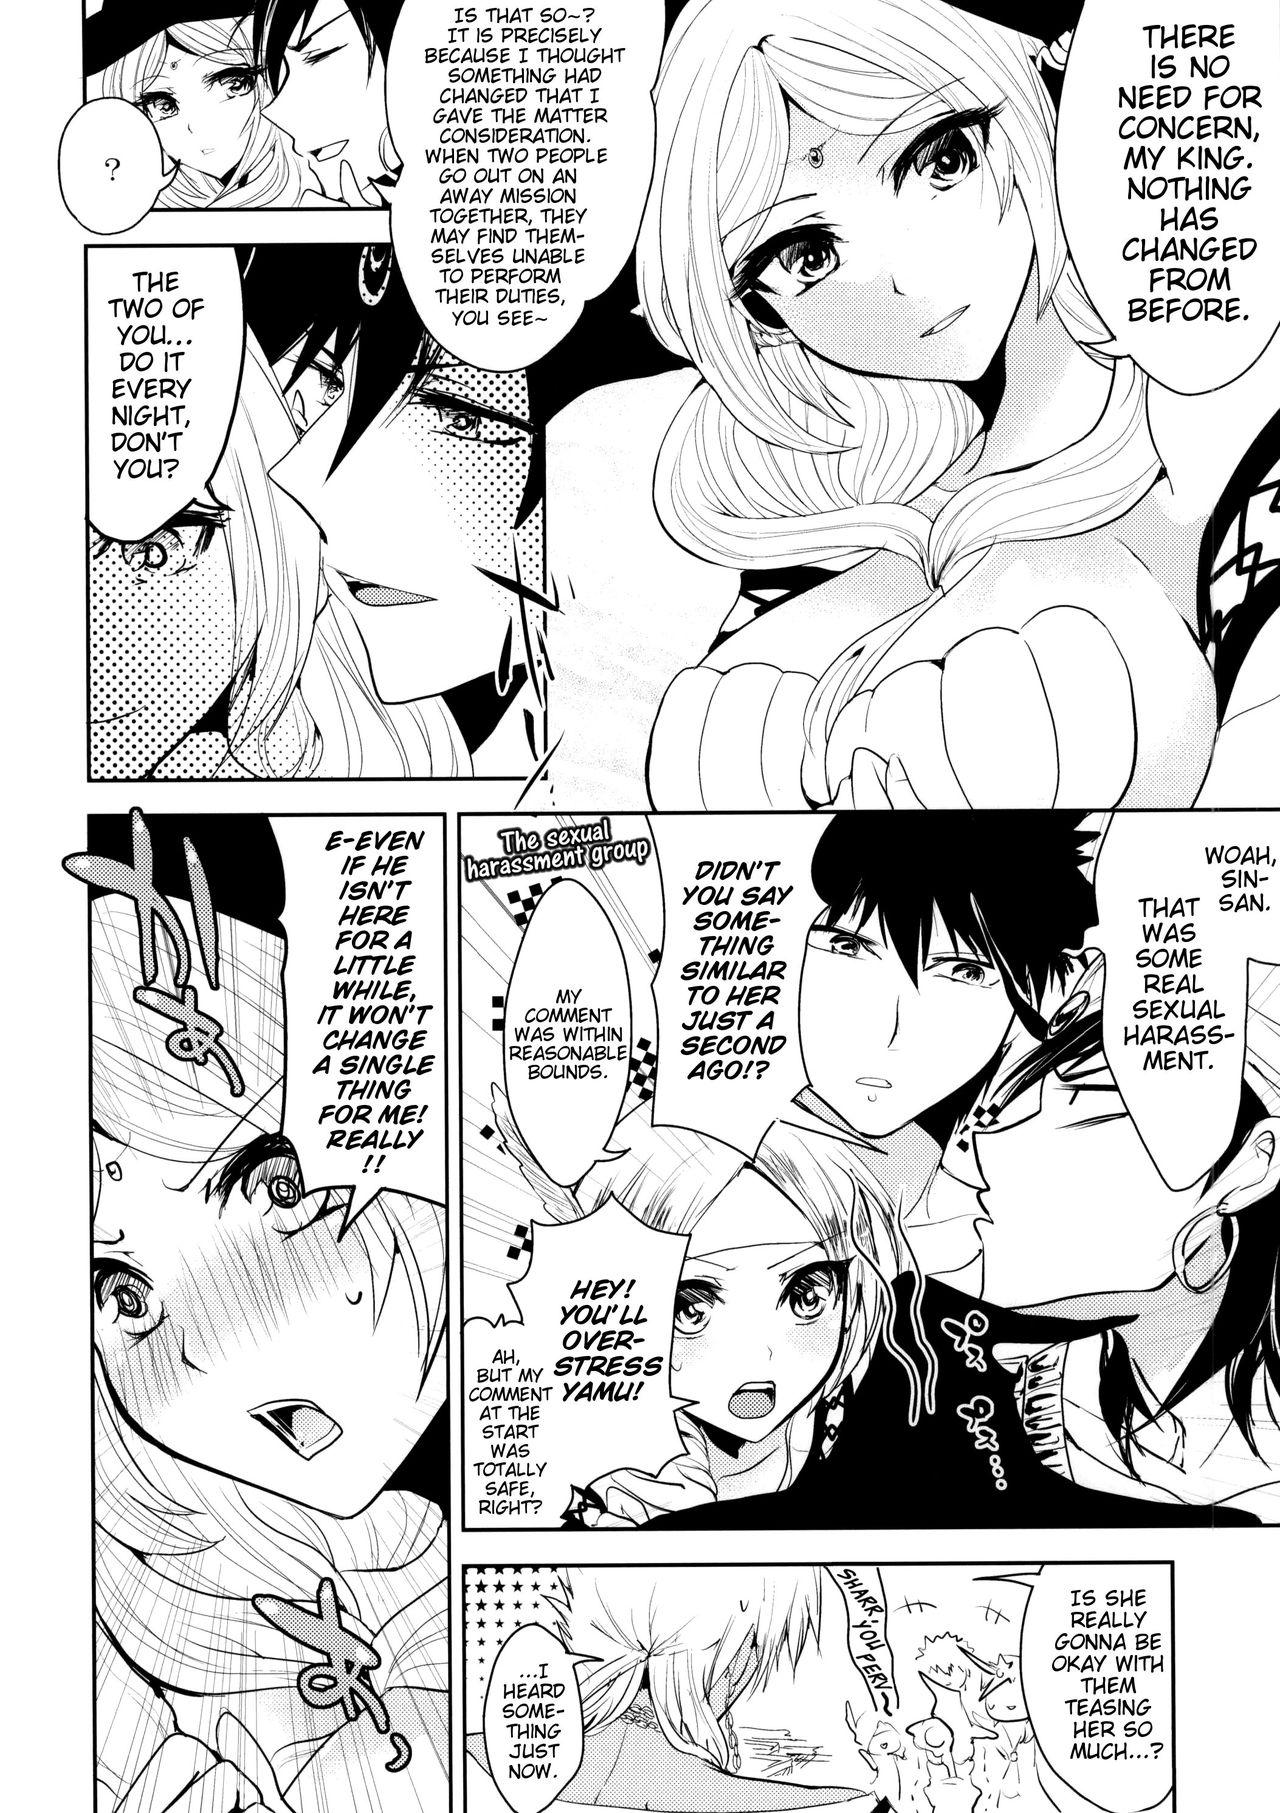 Trap s.t.a. - Magi the labyrinth of magic Reality Porn - Page 3